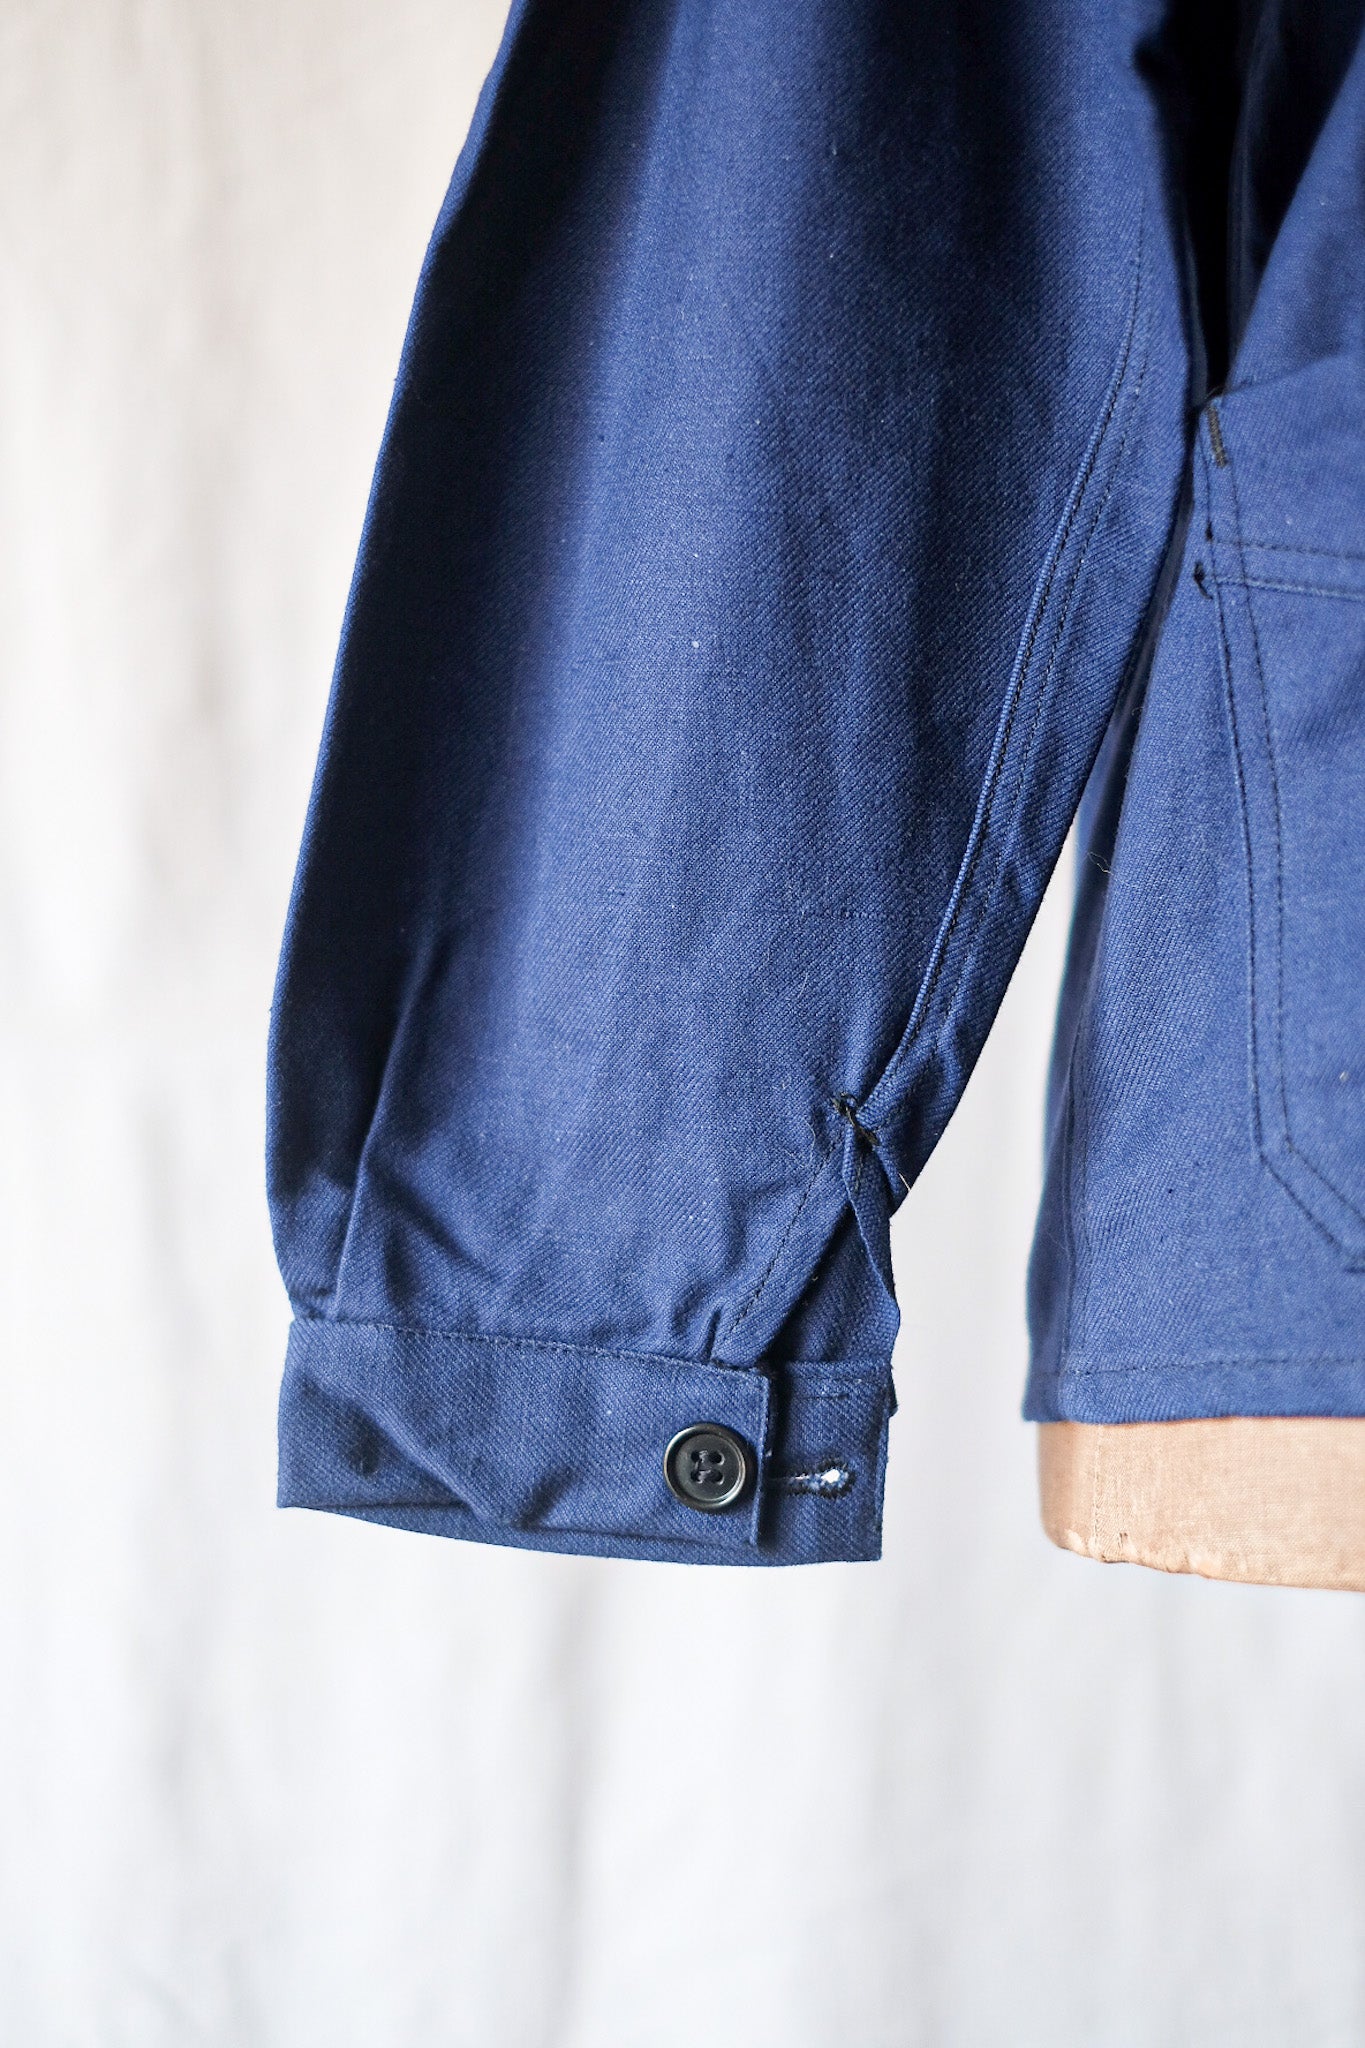 【~40's】French Vintage Blue Cotton Twill Work Jacket